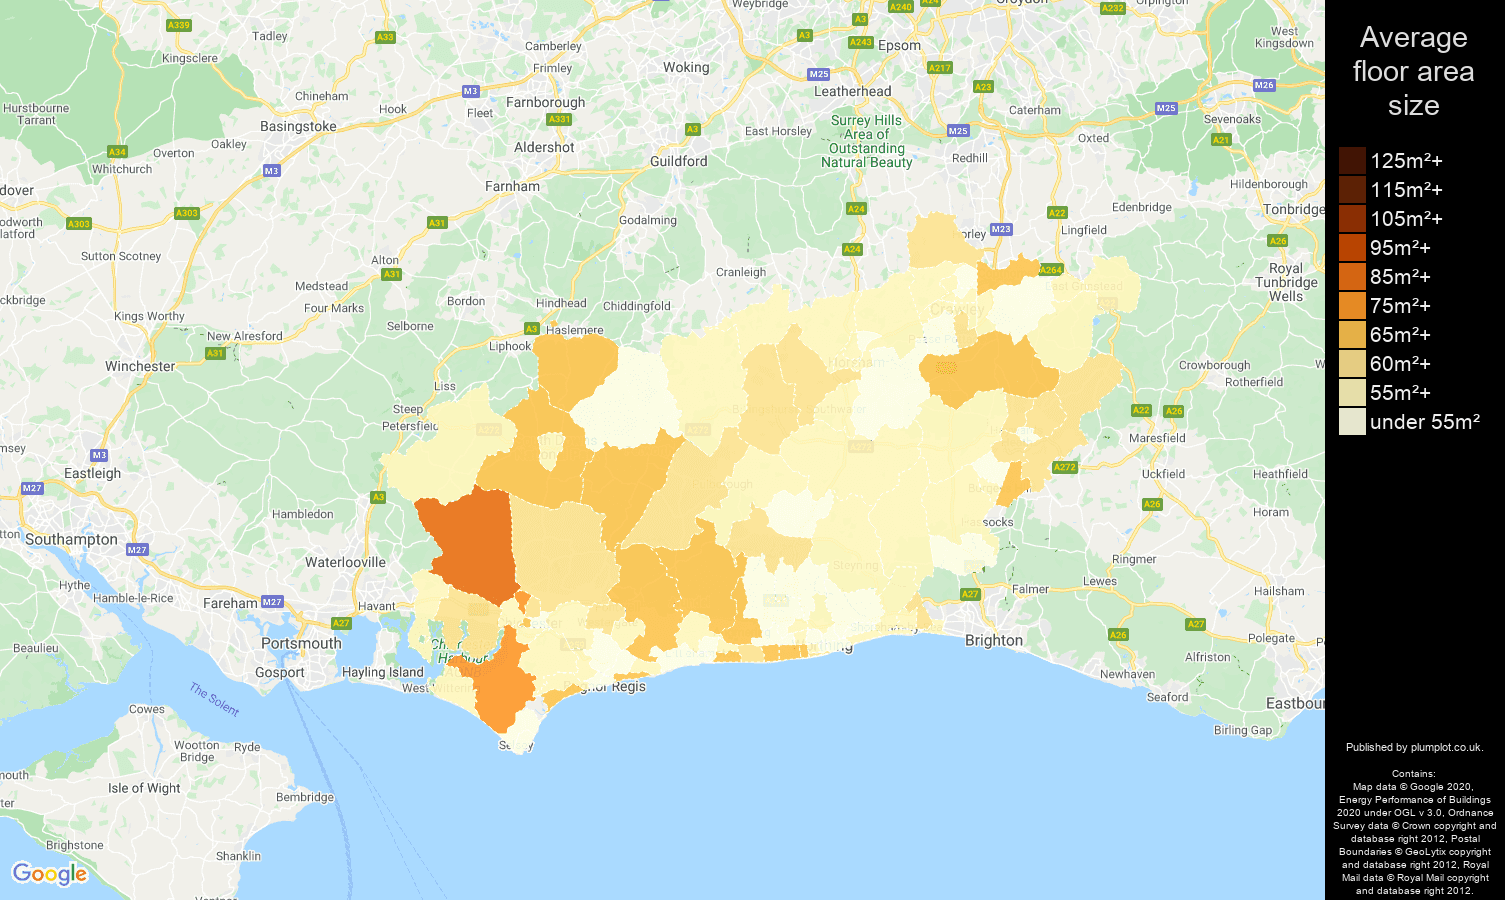 West Sussex map of average floor area size of flats